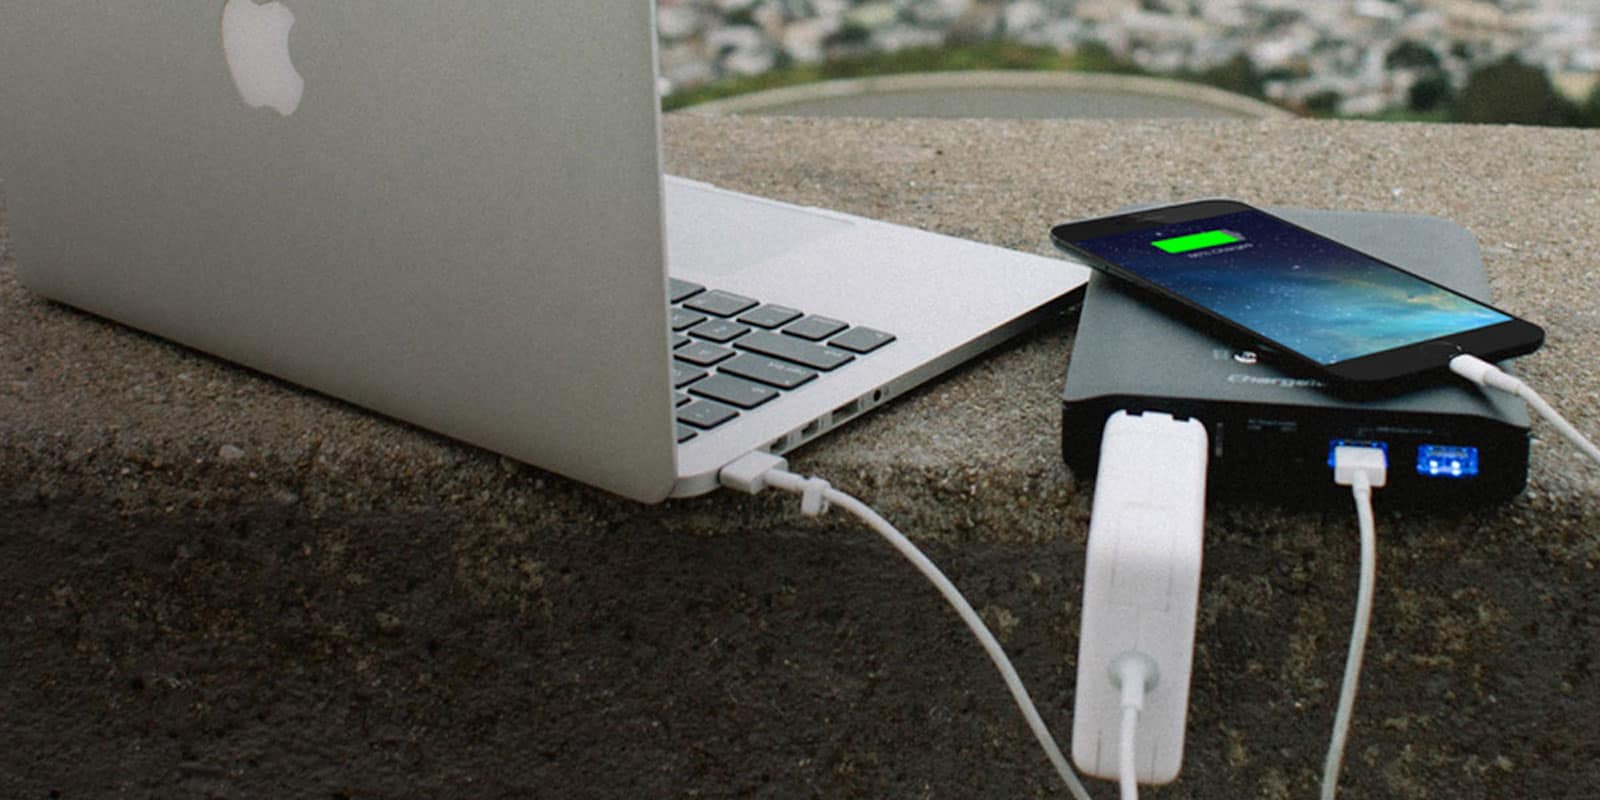 This tiny battery has a massive capacity, able to charge an iPhone 6 Plus as many as 8 times.